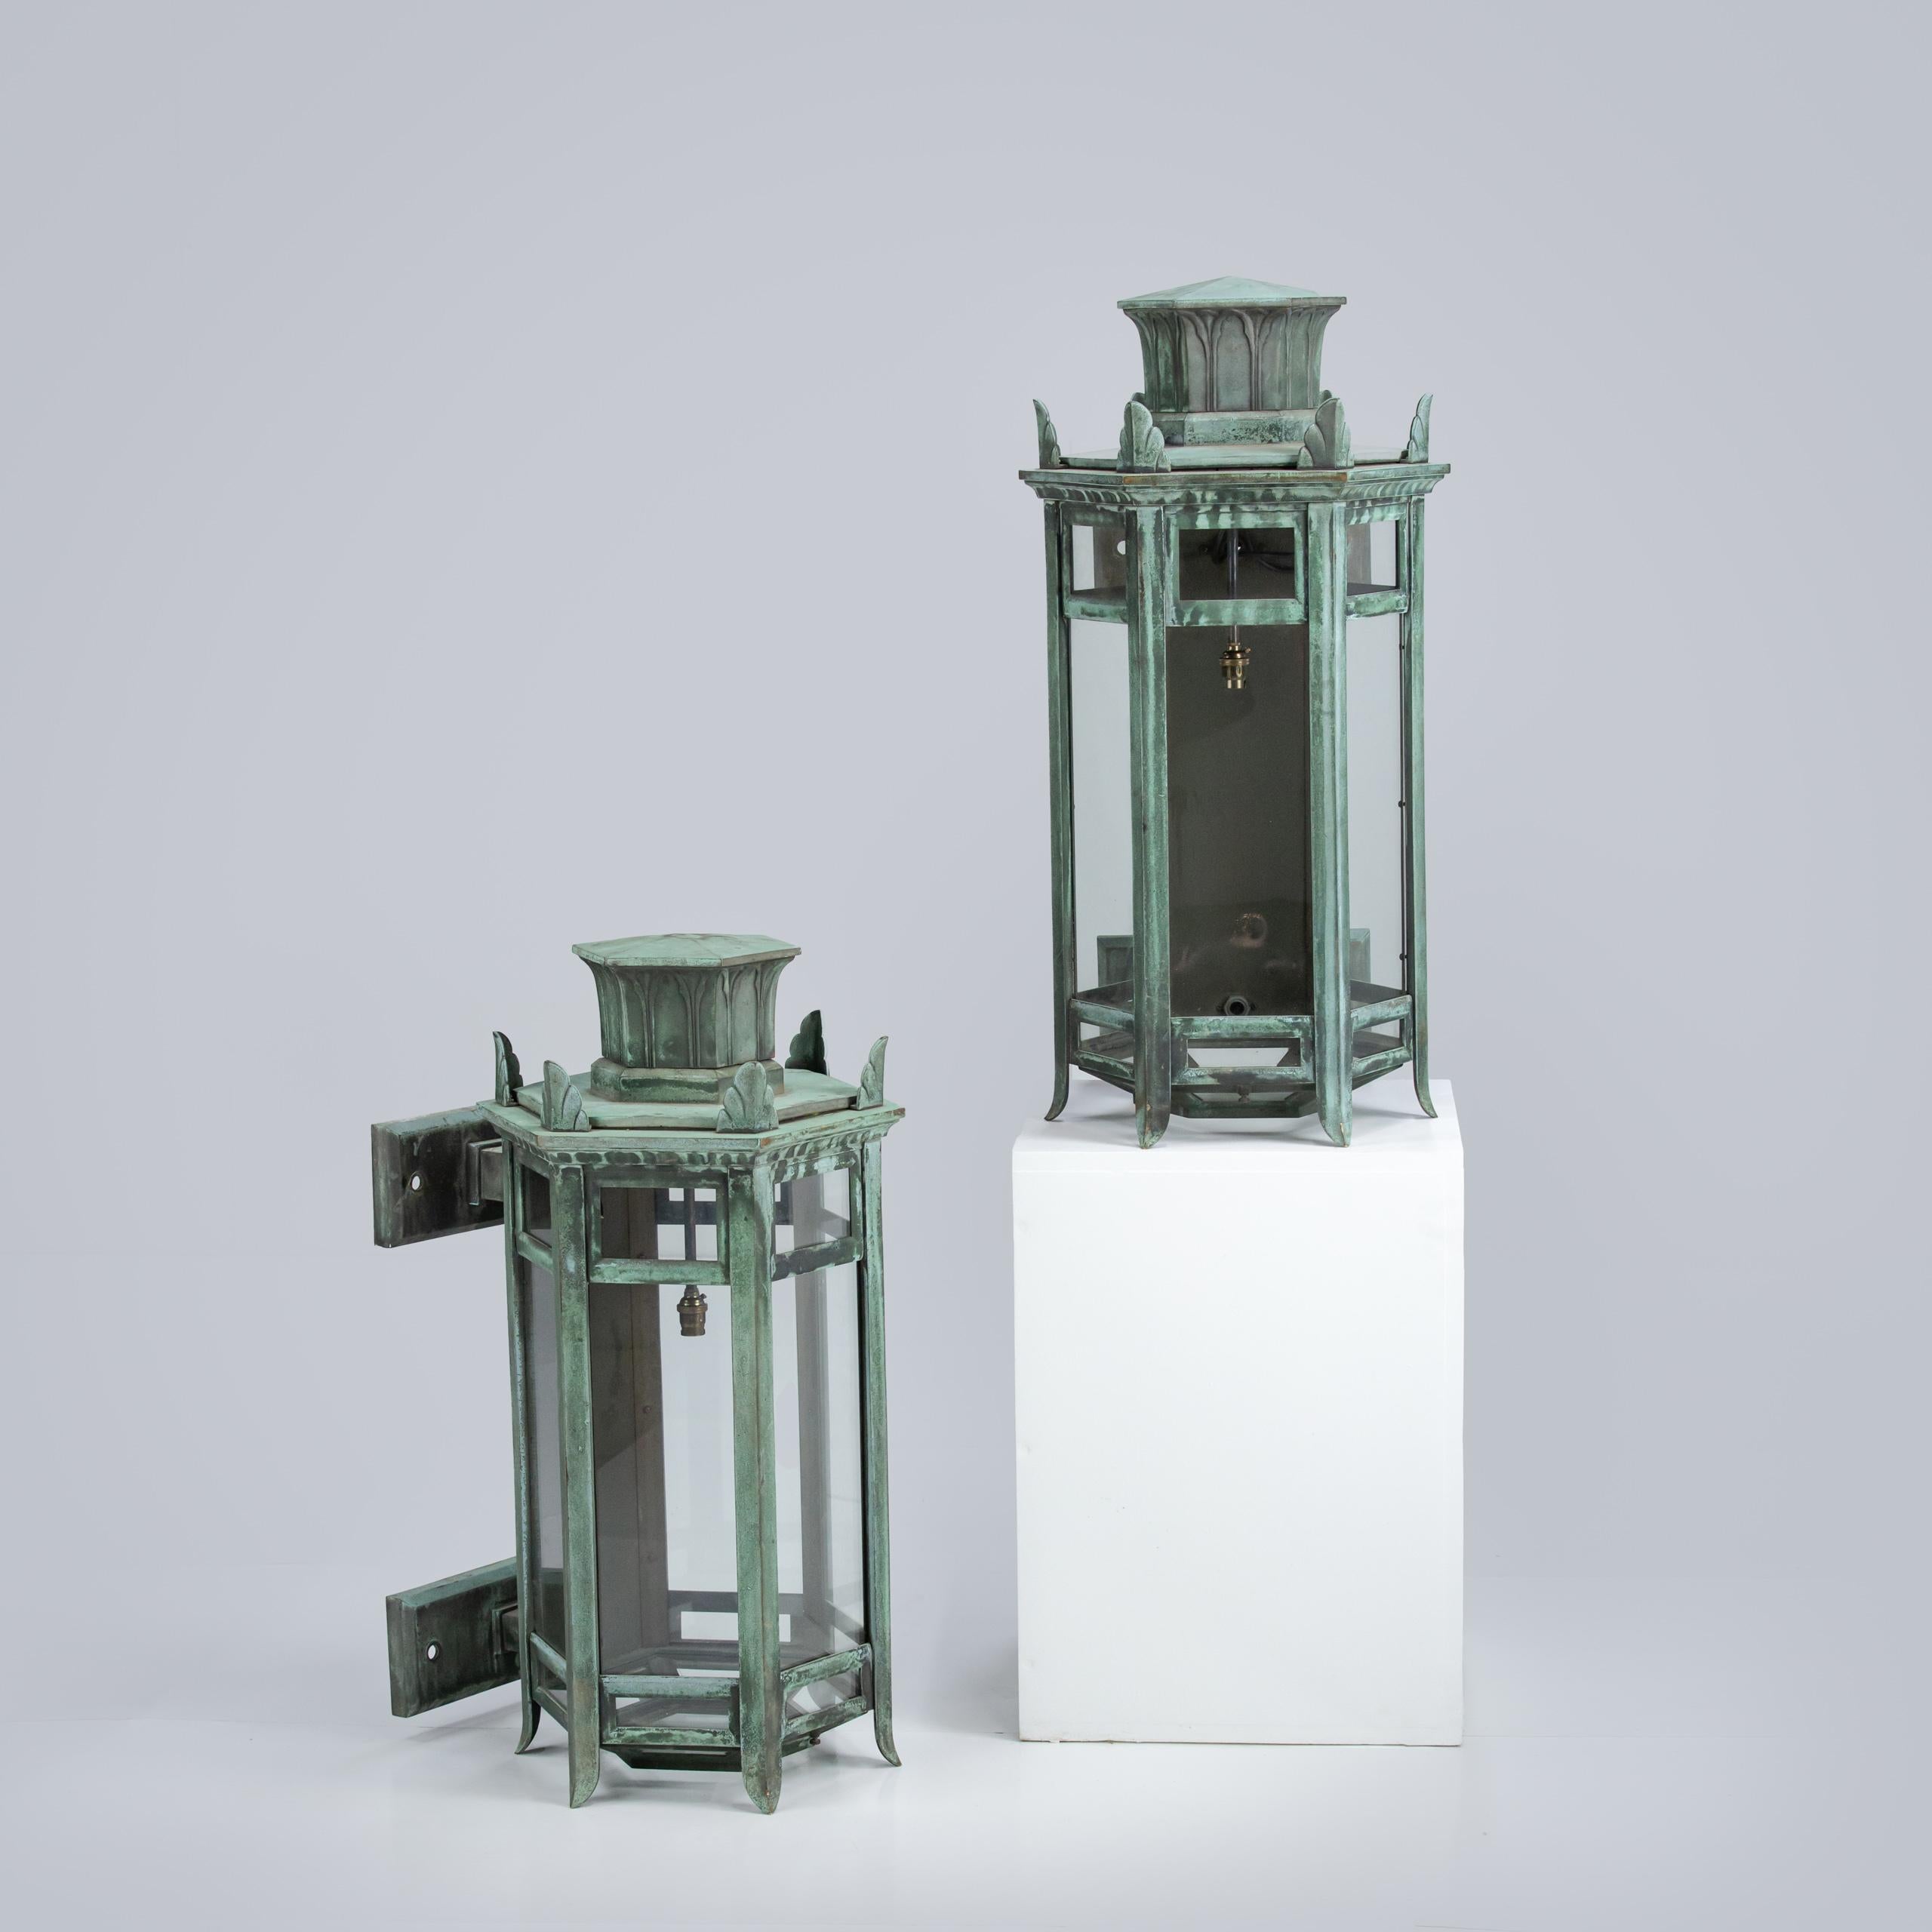 Truly magnificent pair of bronze wall hung porch lanterns, simply vast scale, excellent natural verdigris patination. Fine crisp casting. Beautifully manufactured. 

England, Early 20th Century.